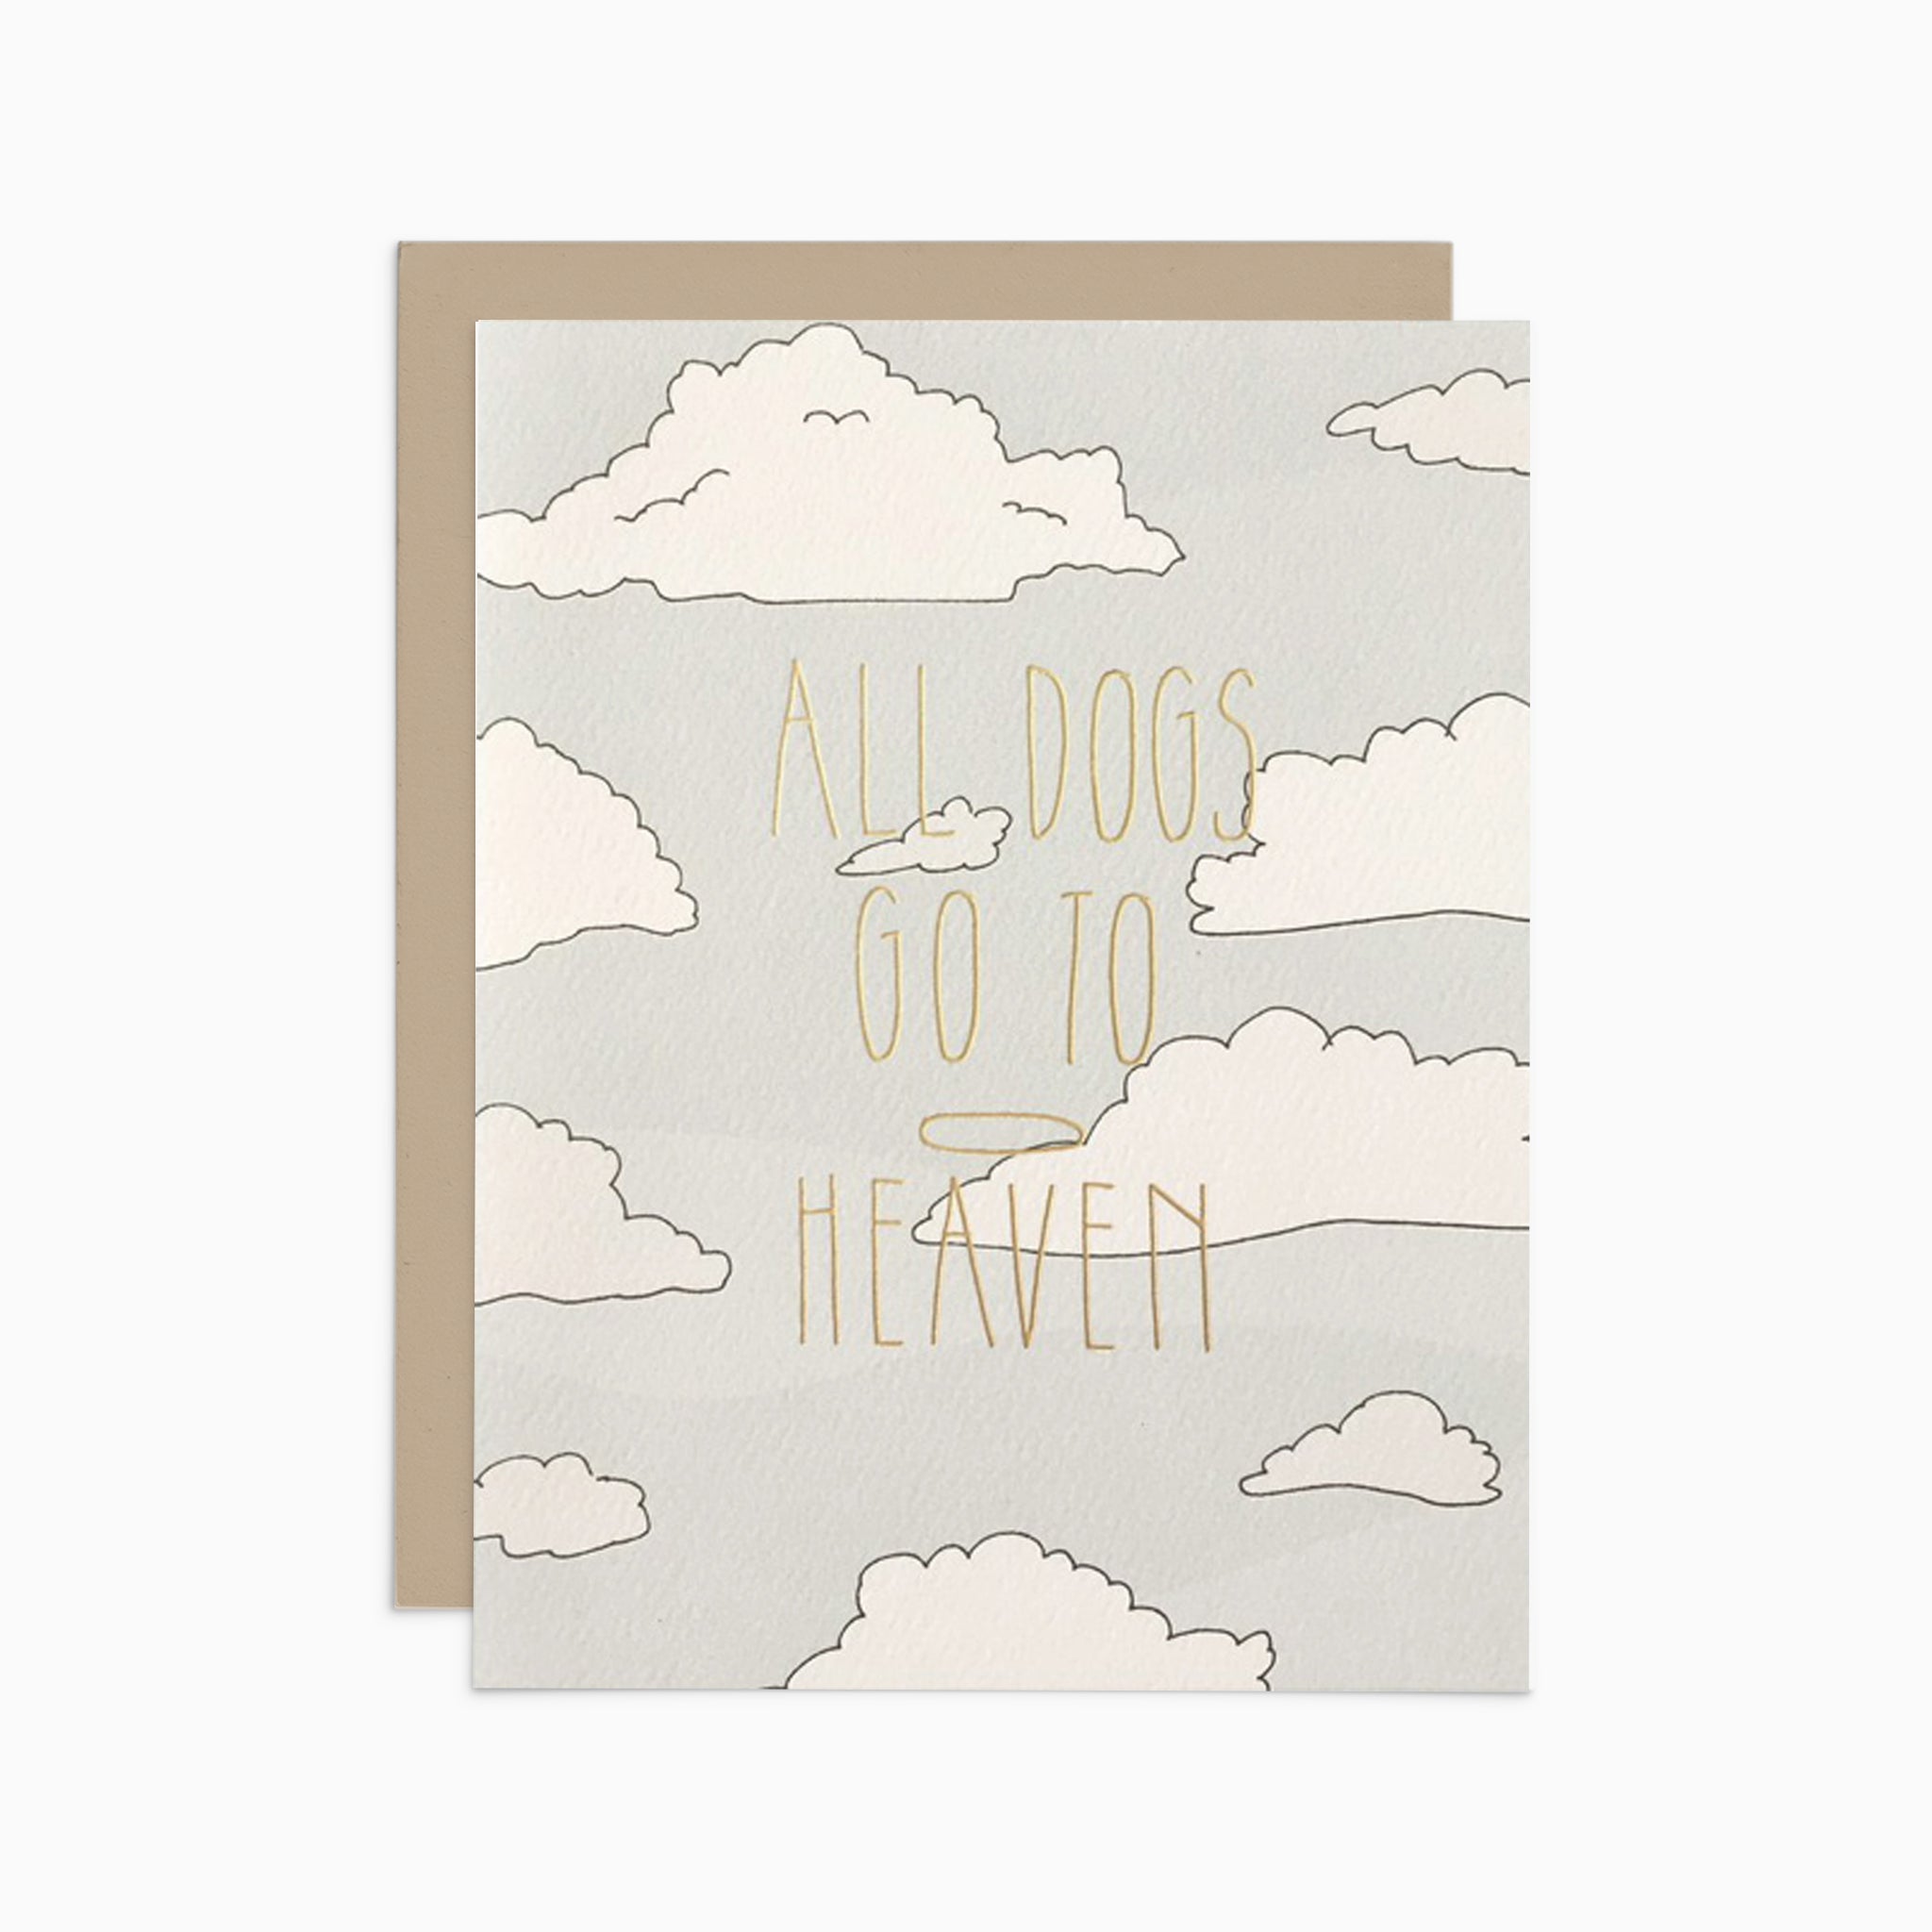 All Dogs Go To Heaven Card